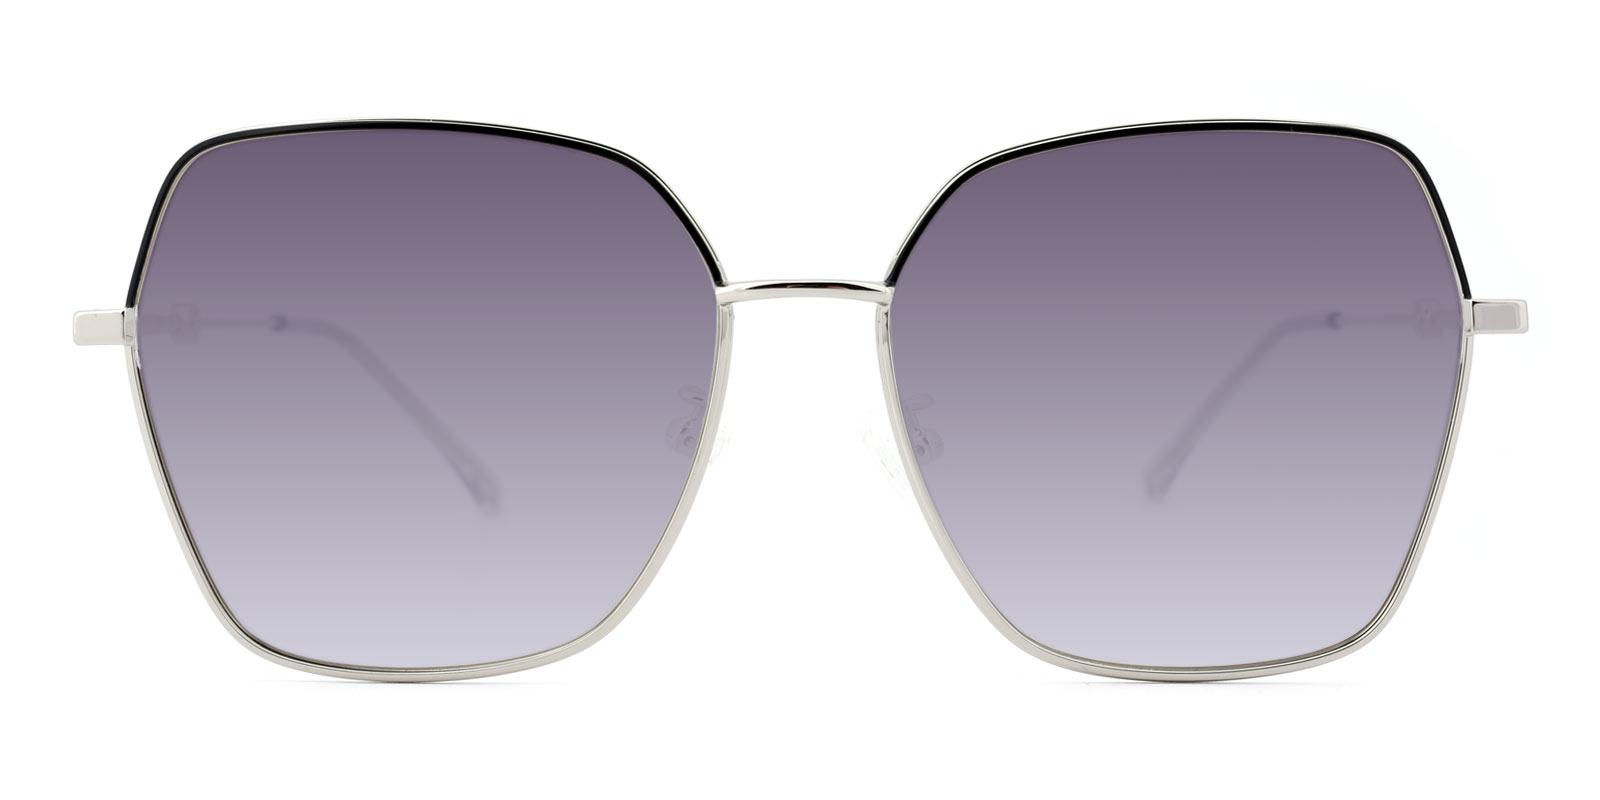 AfternoonTea-Silver-Square-Metal-Sunglasses-detail